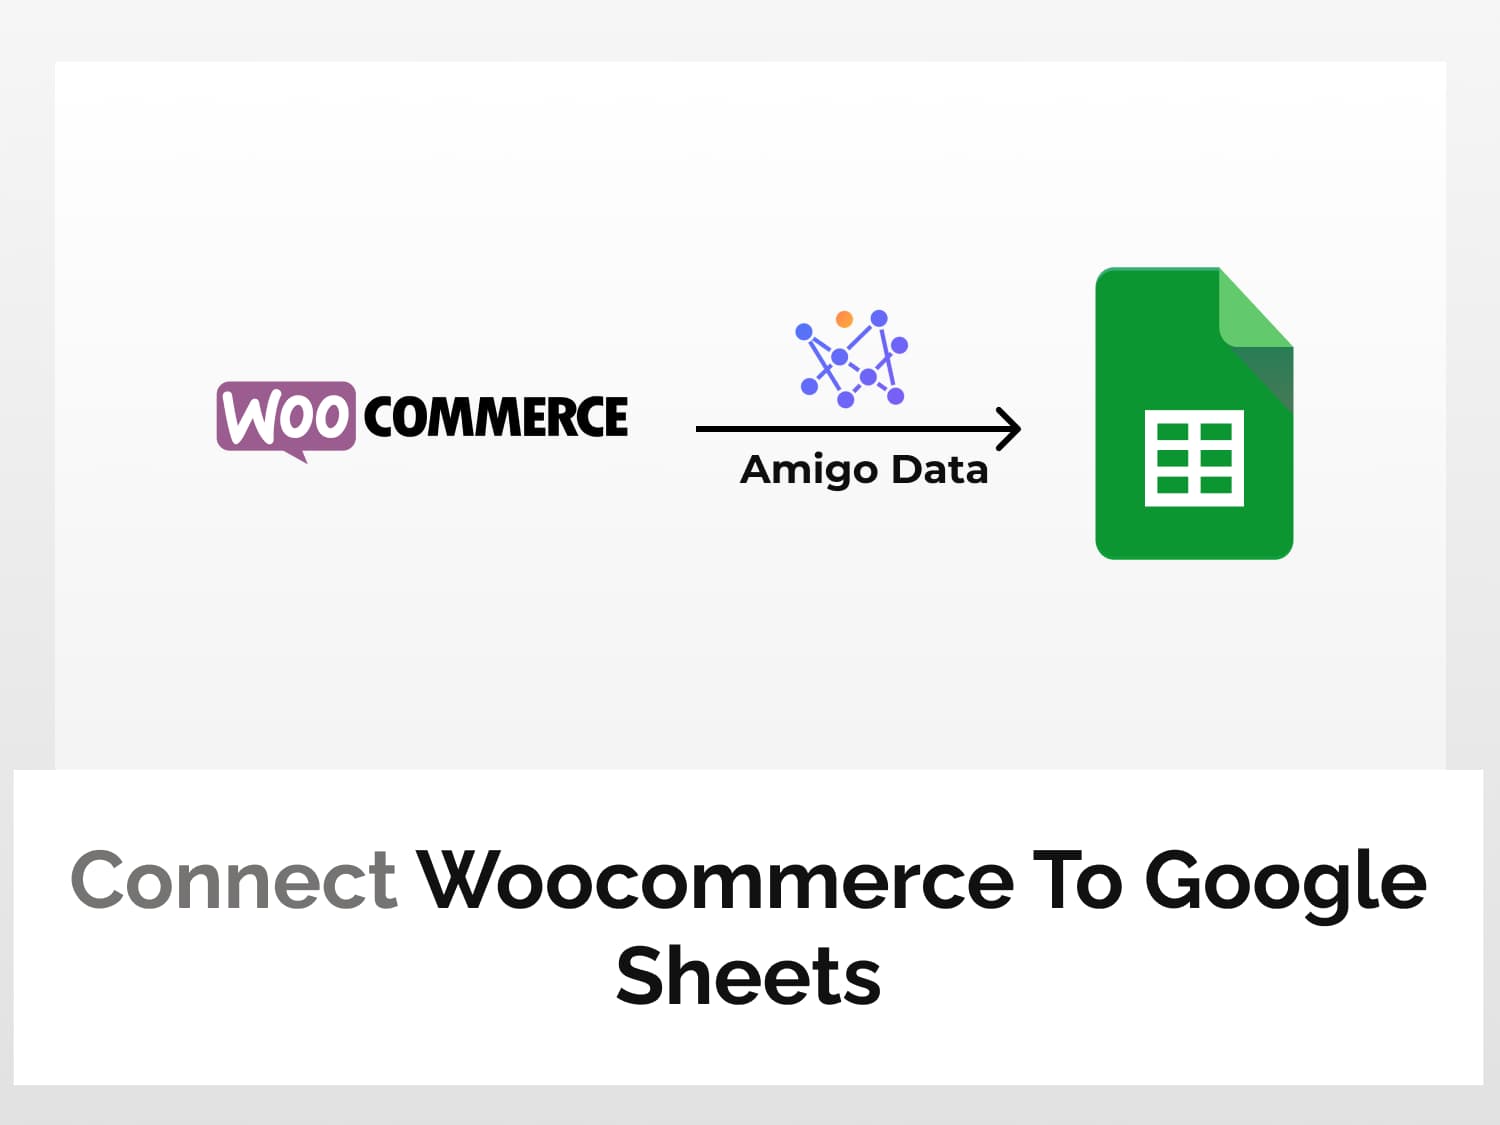 How to connect Woocommerce to Google Sheets